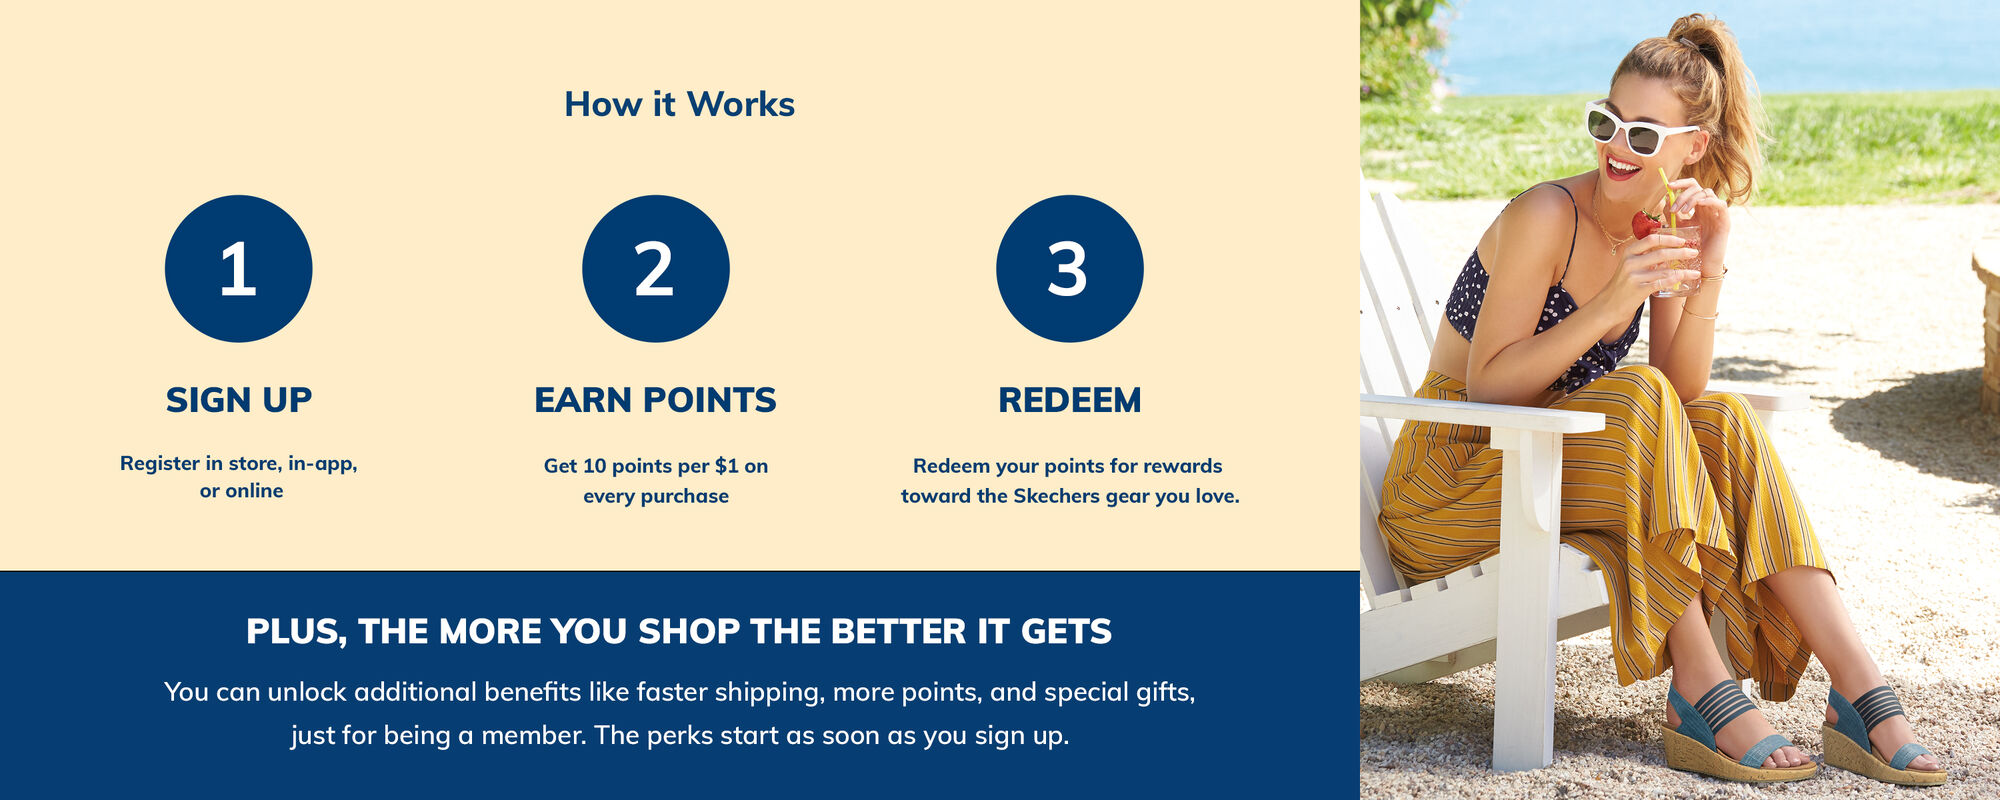 How to Redeem Skechers Points?